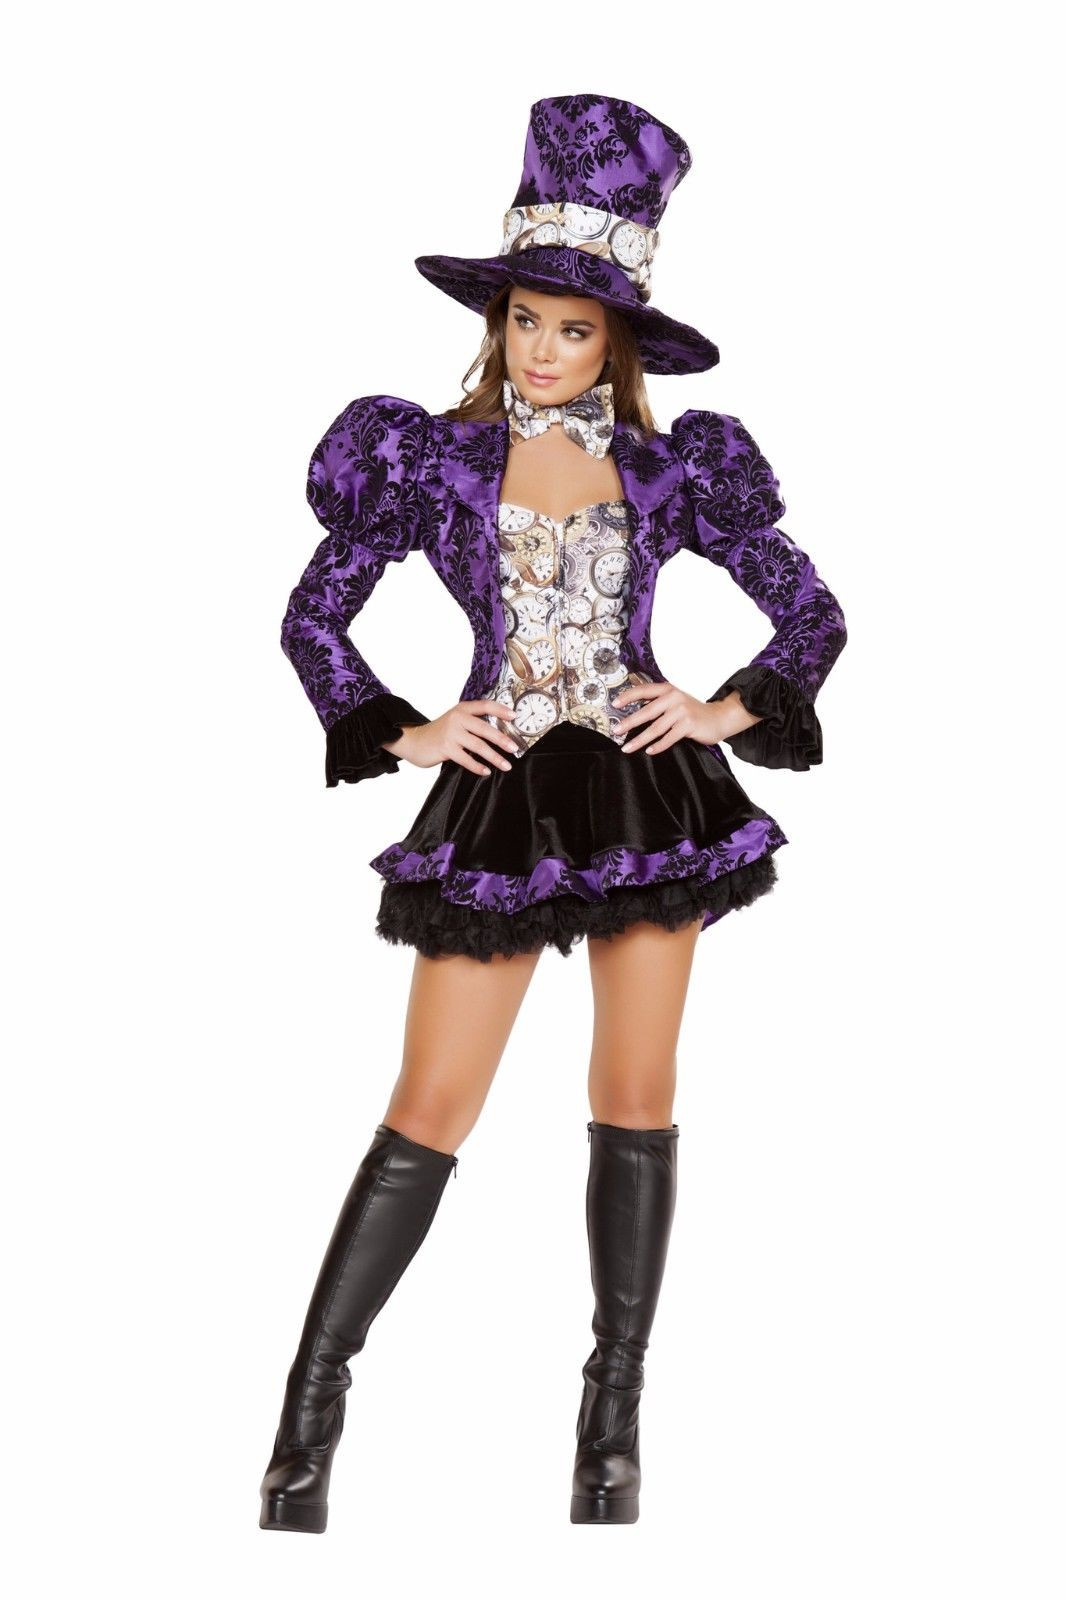 Mad Hatter Tea Party Costume Ideas
 Alice Through The Looking Glass Costumes